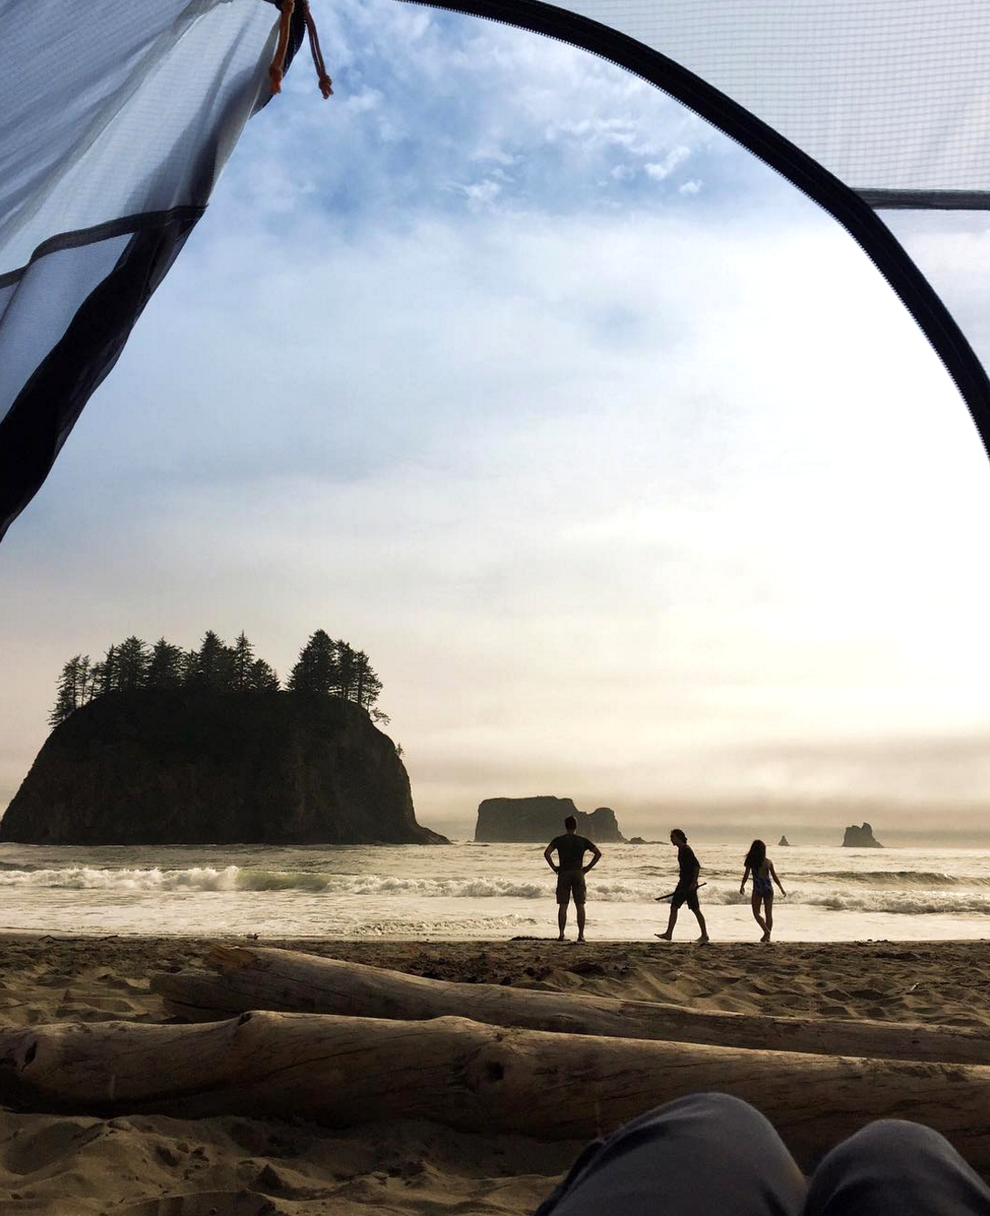 This dreamlike vision on the beaches of La Push in Washington.